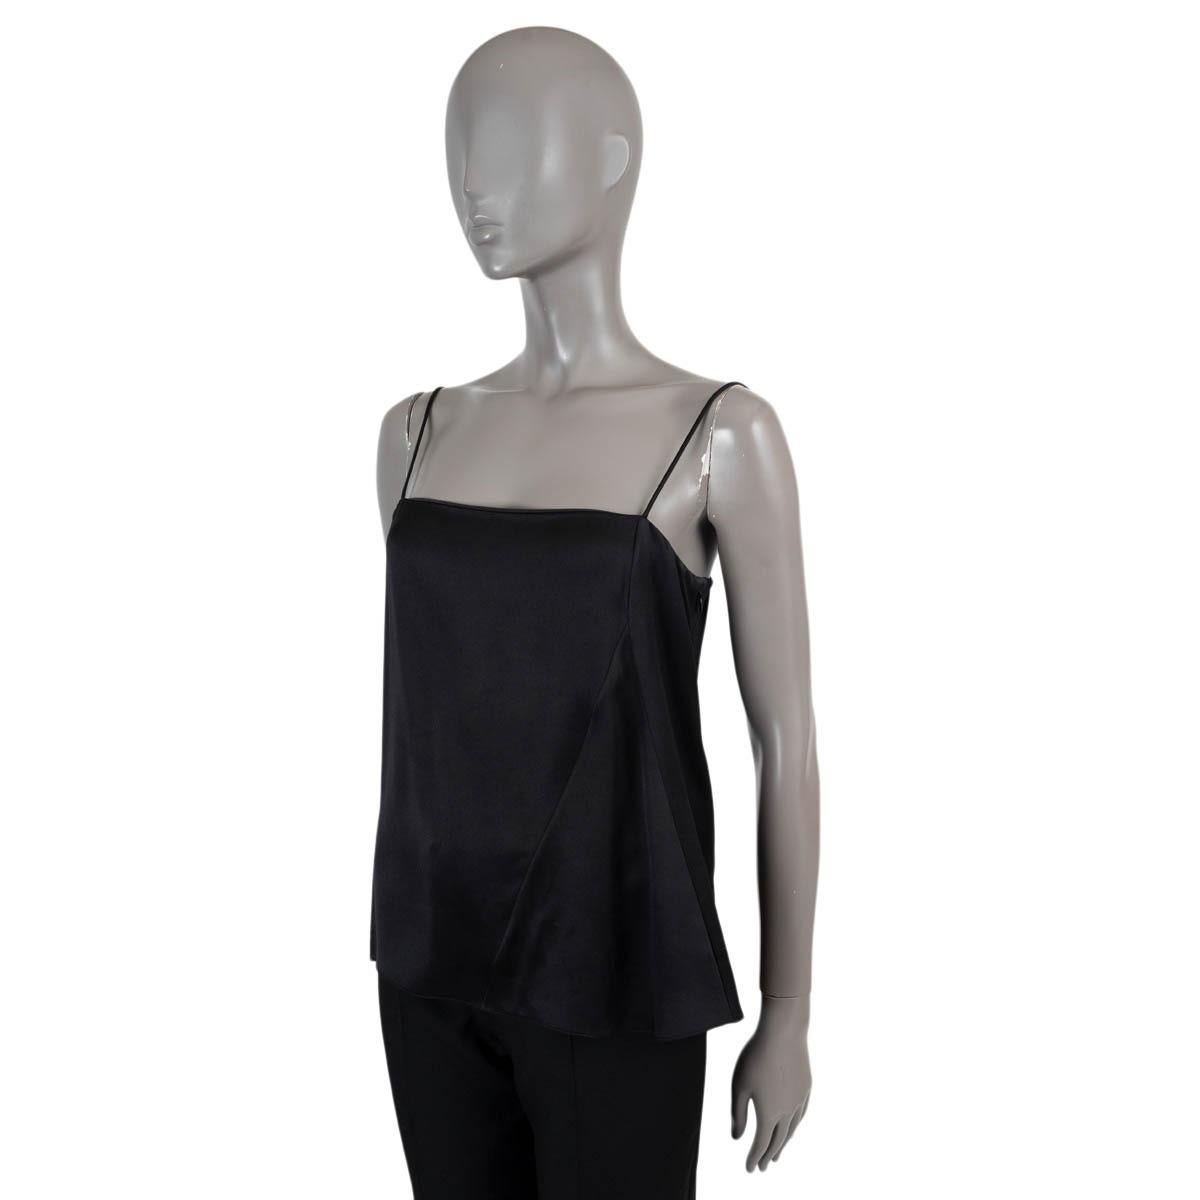 100% authentic Christian Dior camisole top in black silk (100%). Opens with a zipper on the side. Has been worn and is in excellent condition.

Measurements
Model	4A21529A1616
Tag Size	38
Size	S
Bust From	84cm (32.8in)
Waist From	80cm (31.2in)
Hips